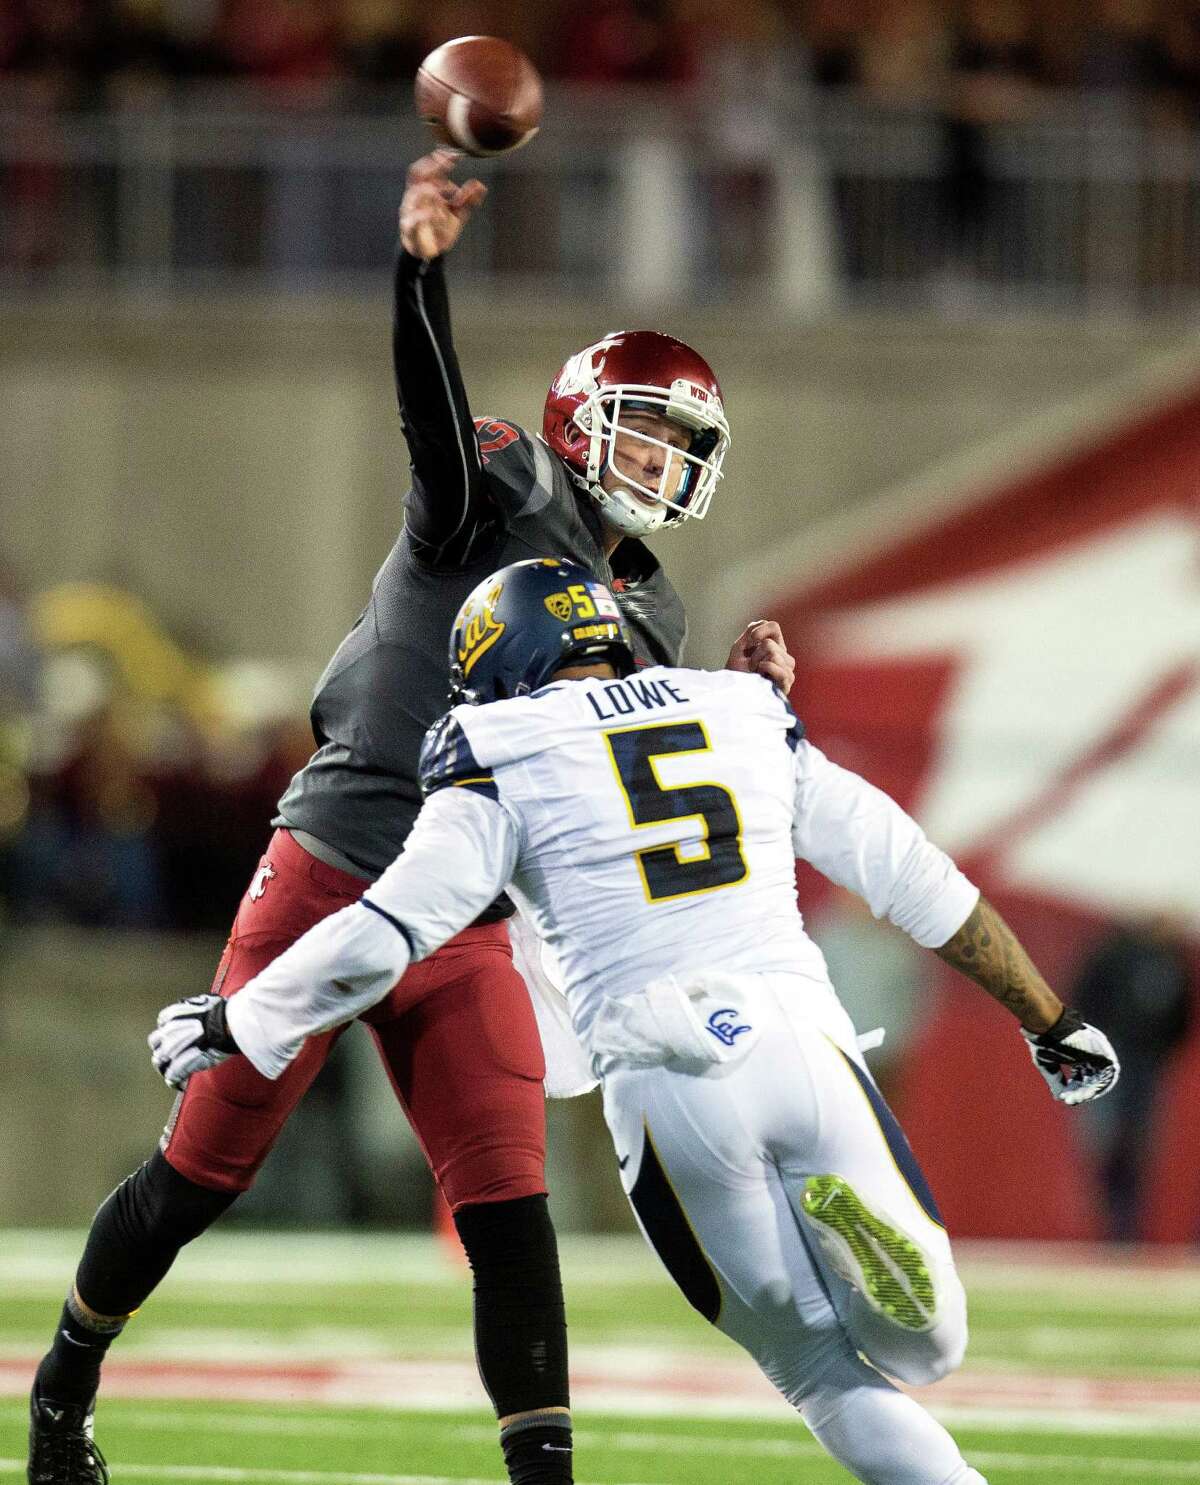 Washington State's Connor Halliday beats the blitz by Cal's Michael Lowe during his big game Saturday.